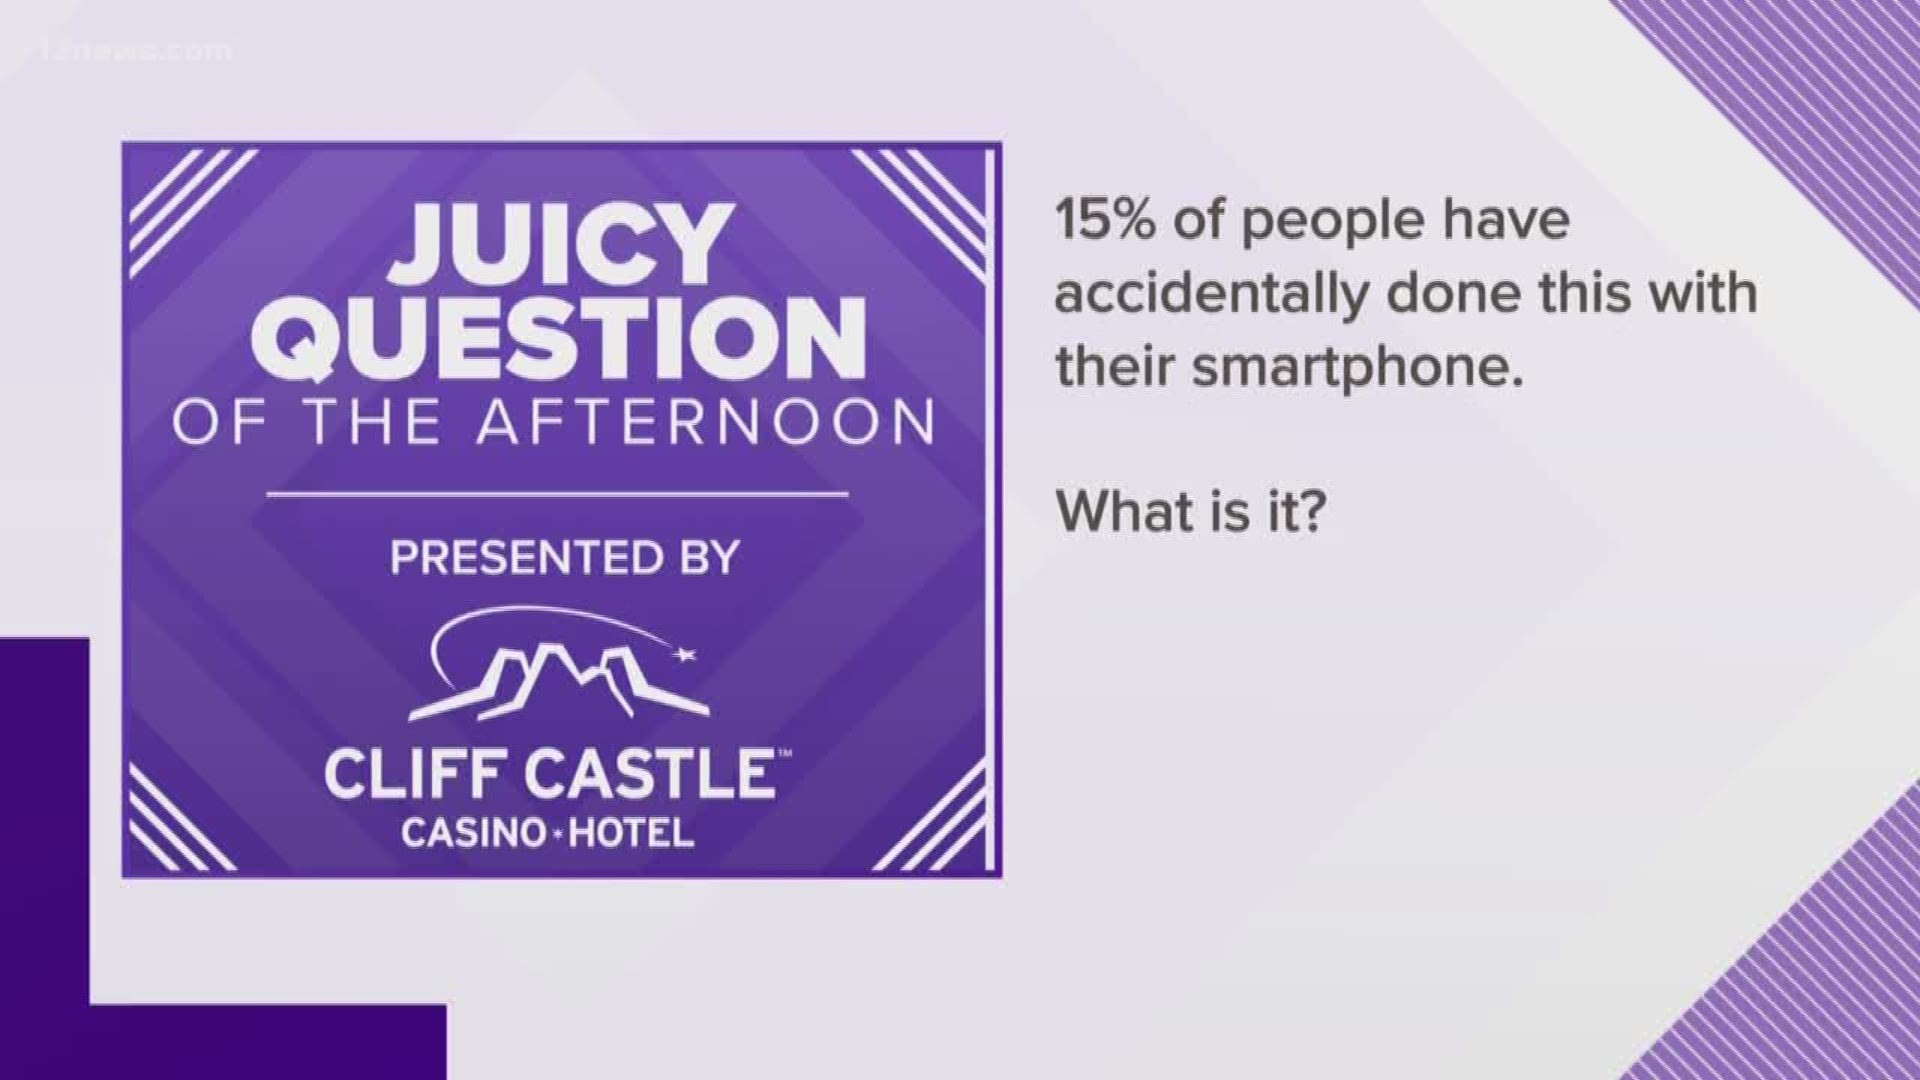 15% of people have accidentally done THIS with their smartphone. What is it?